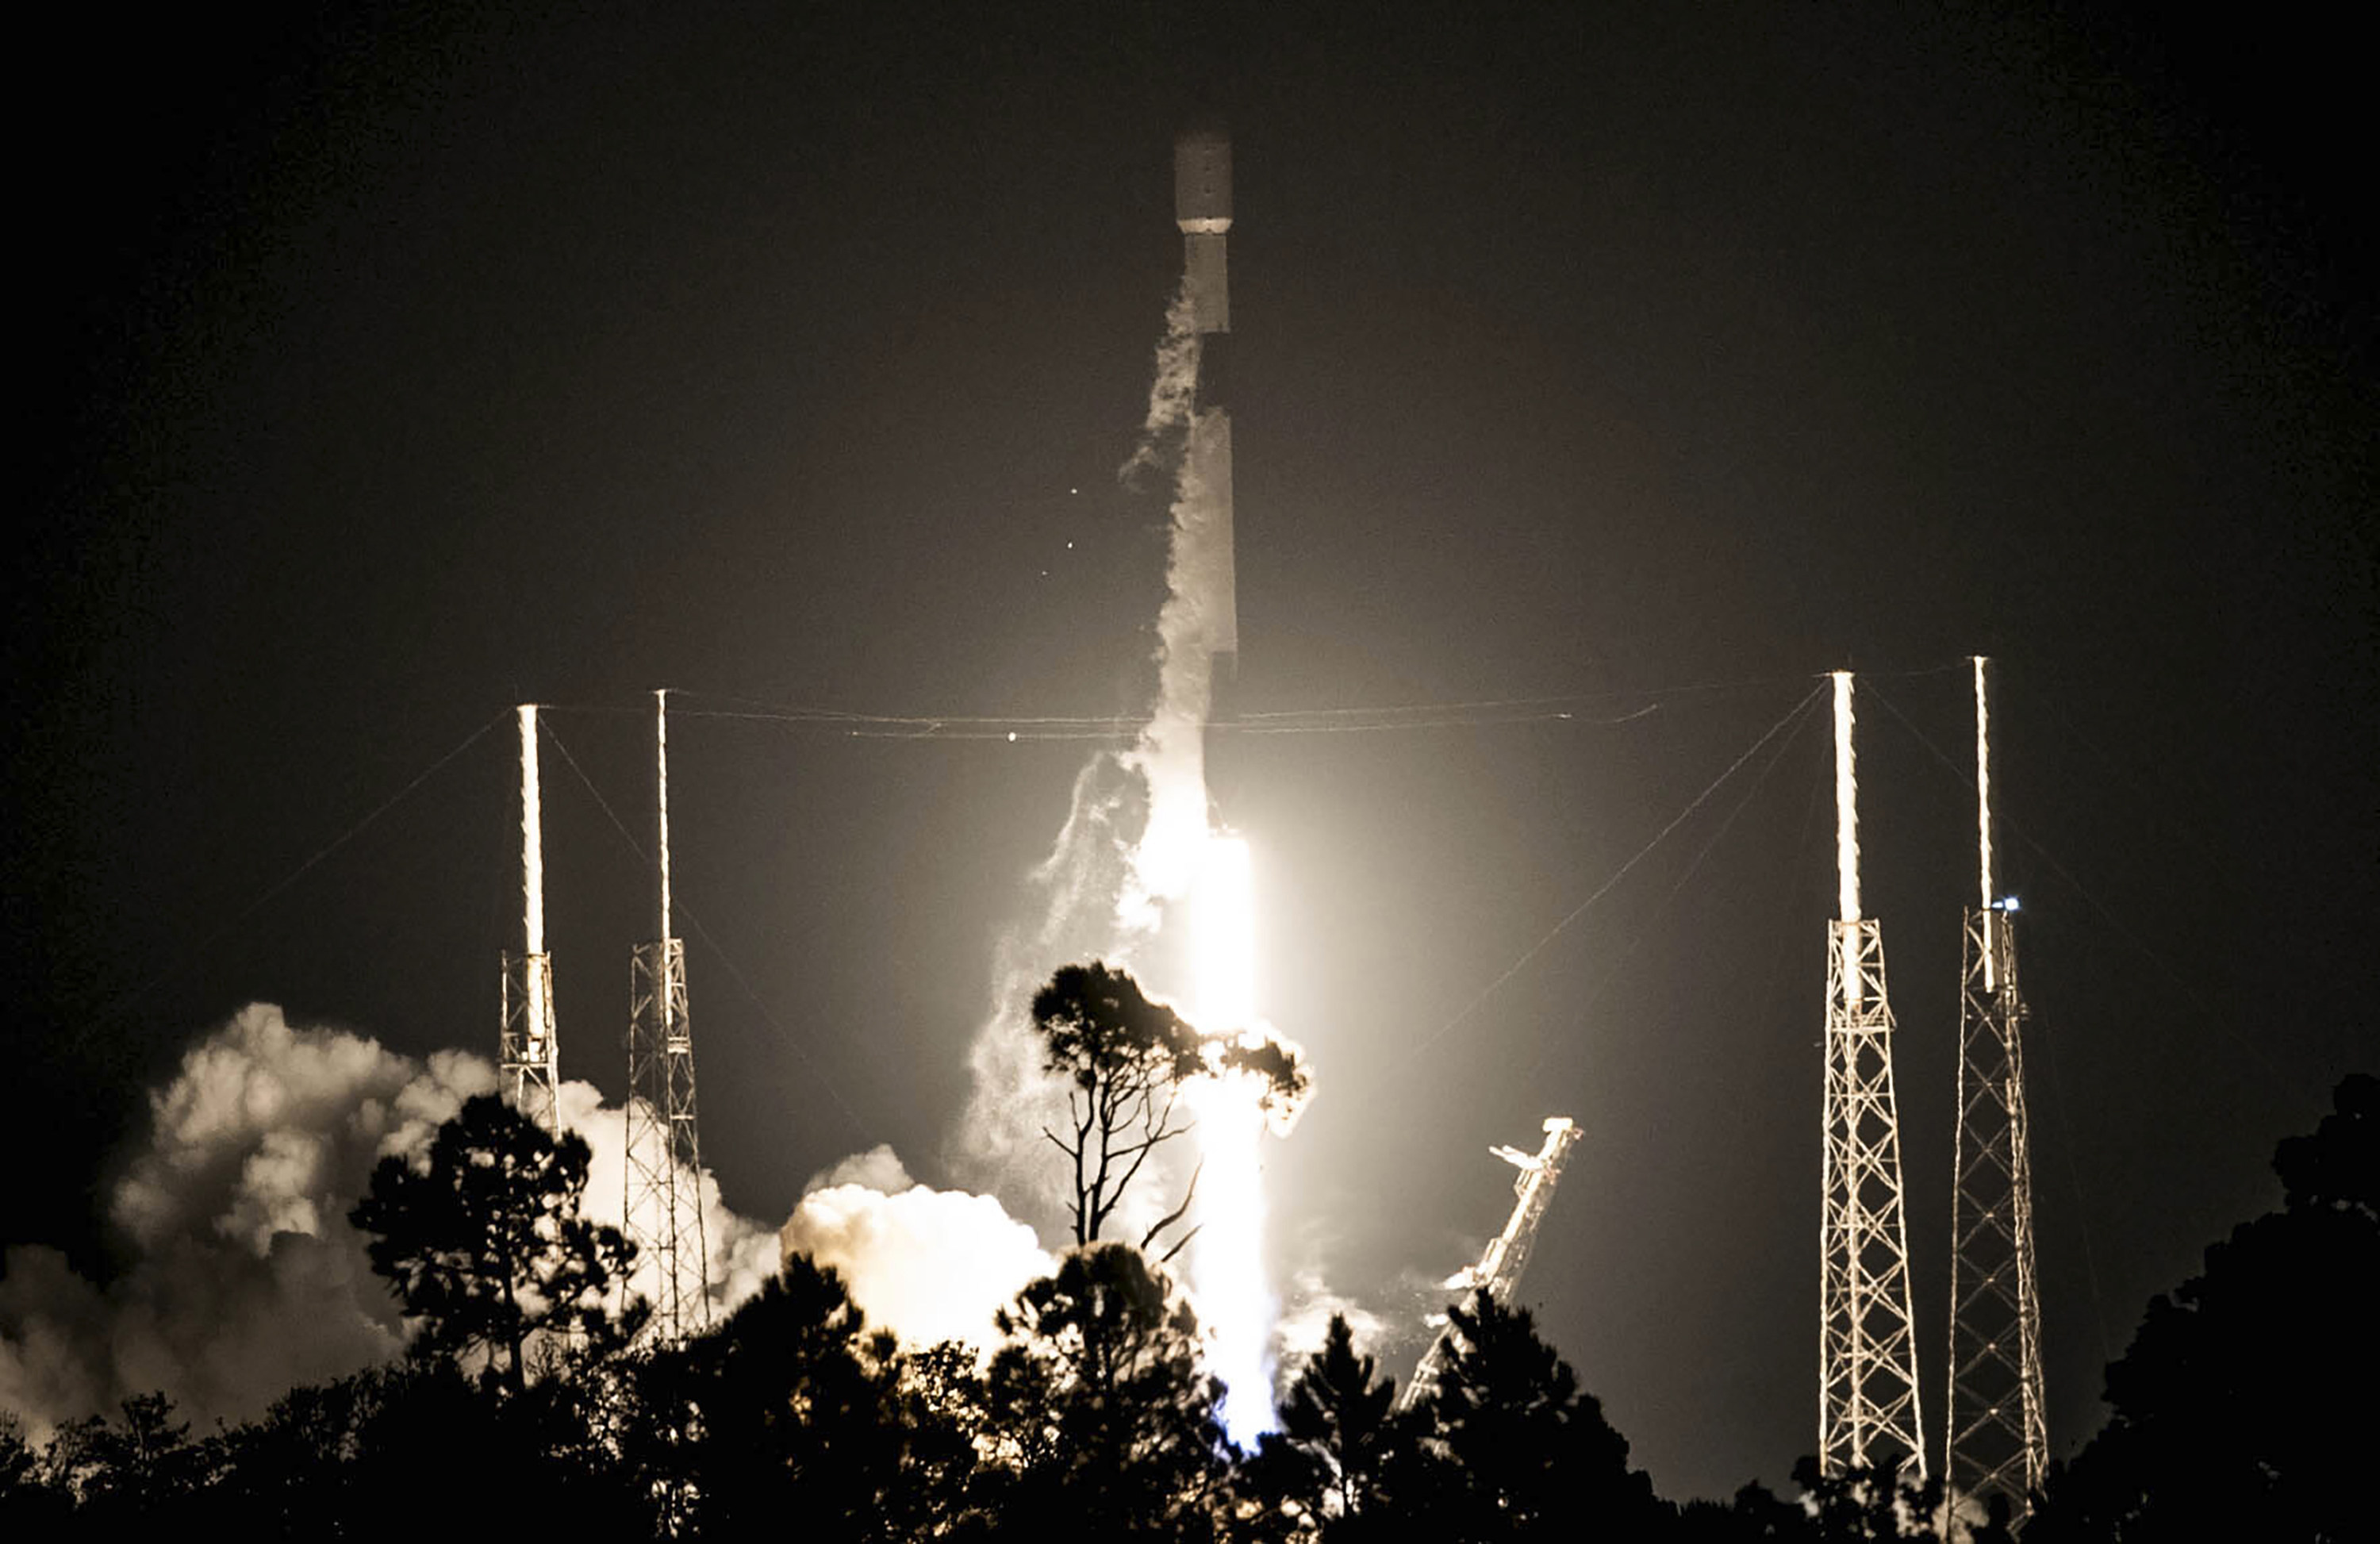 A SpaceX Falcon 9 rocket lifts off from Cape Canaveral Space Force Station in Florida on February 12, 2023. In a new mission scheduled for June, a Falcon 9 rocket will carry cargo that includes NFT artworks etched onto nano fiche disks to be part of the Lunaprise Moon Museum. Photo: AP